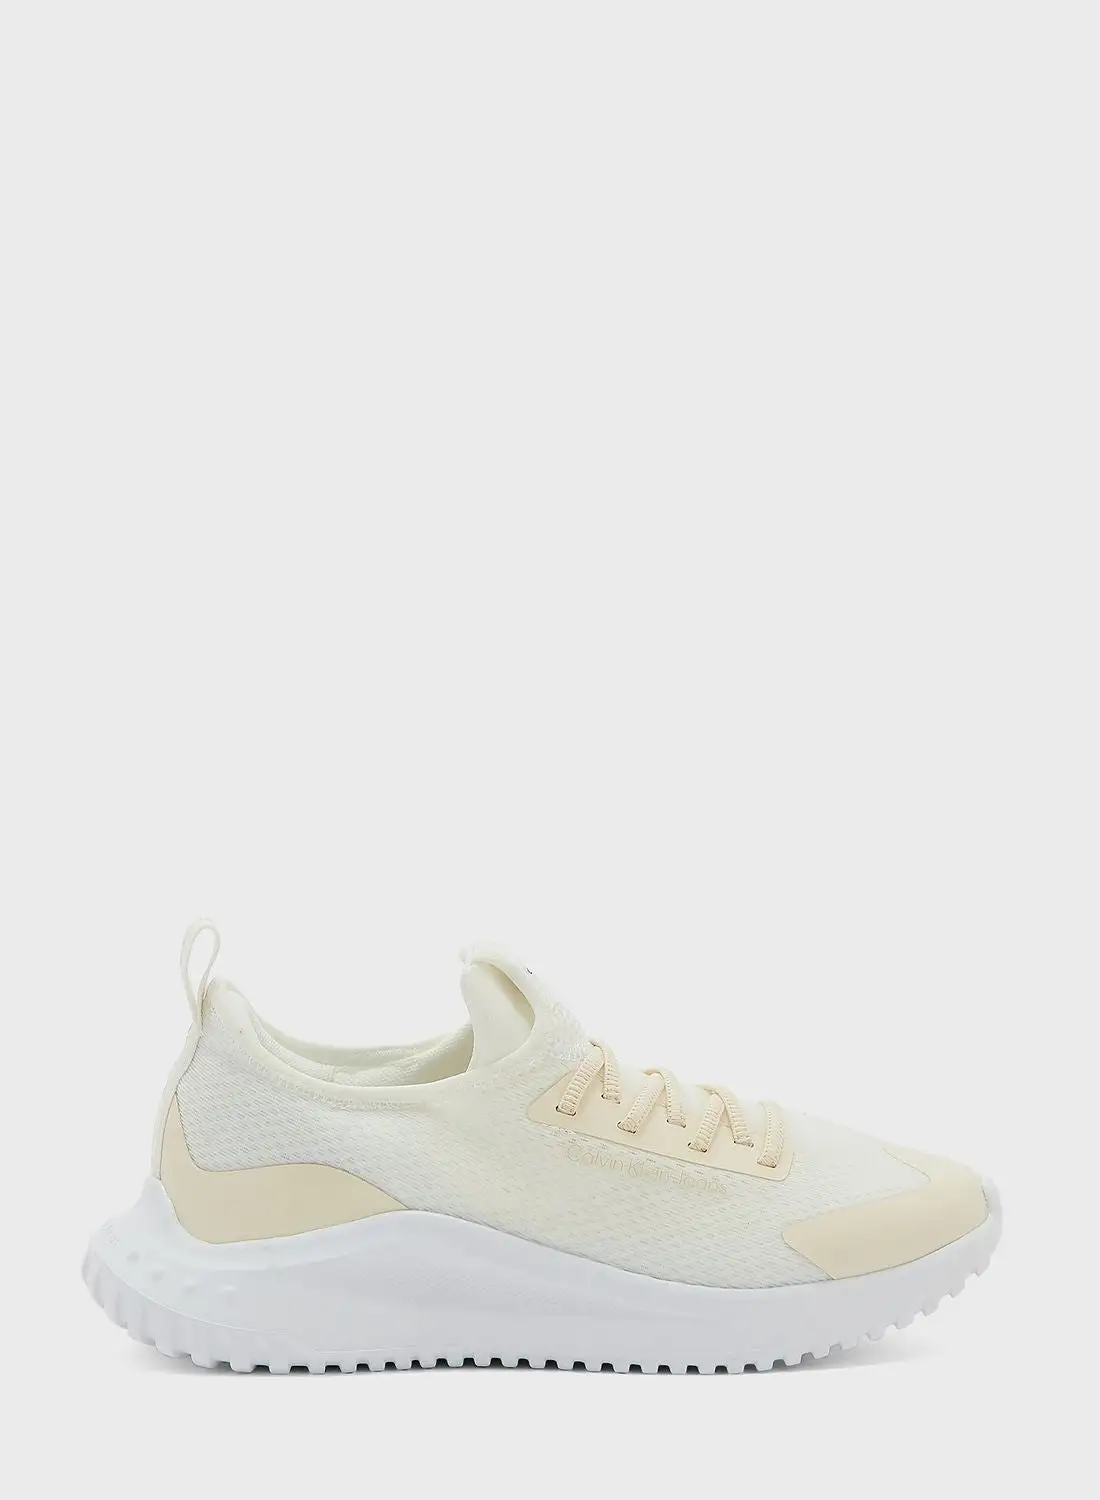 Calvin Klein Jeans Runner Lace Ups Sneakers